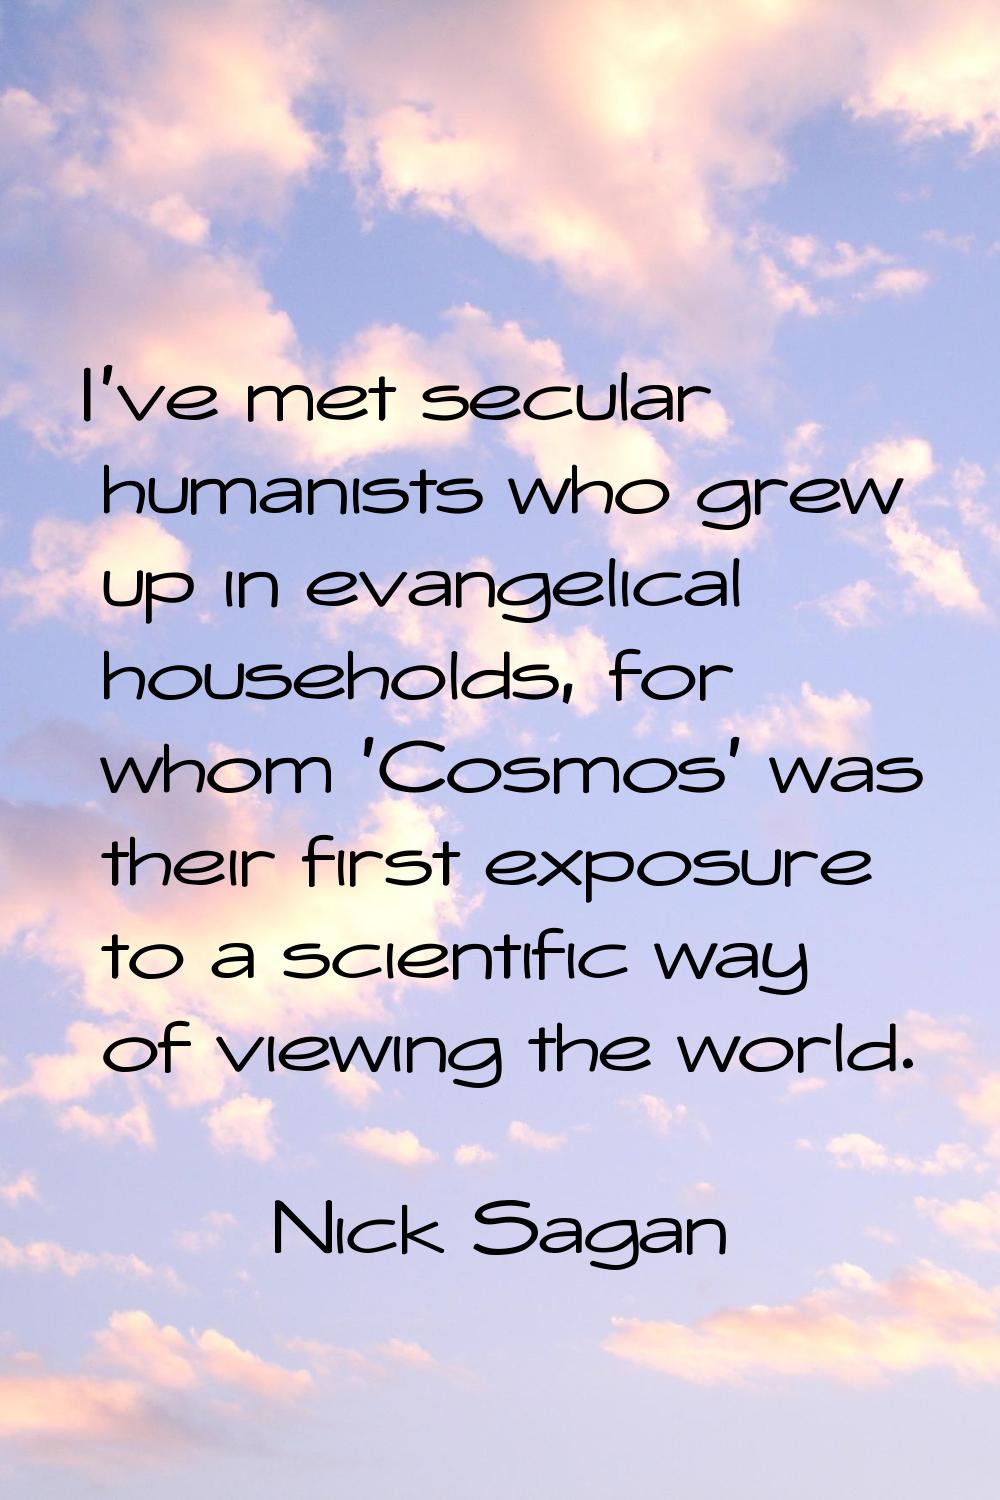 I've met secular humanists who grew up in evangelical households, for whom 'Cosmos' was their first